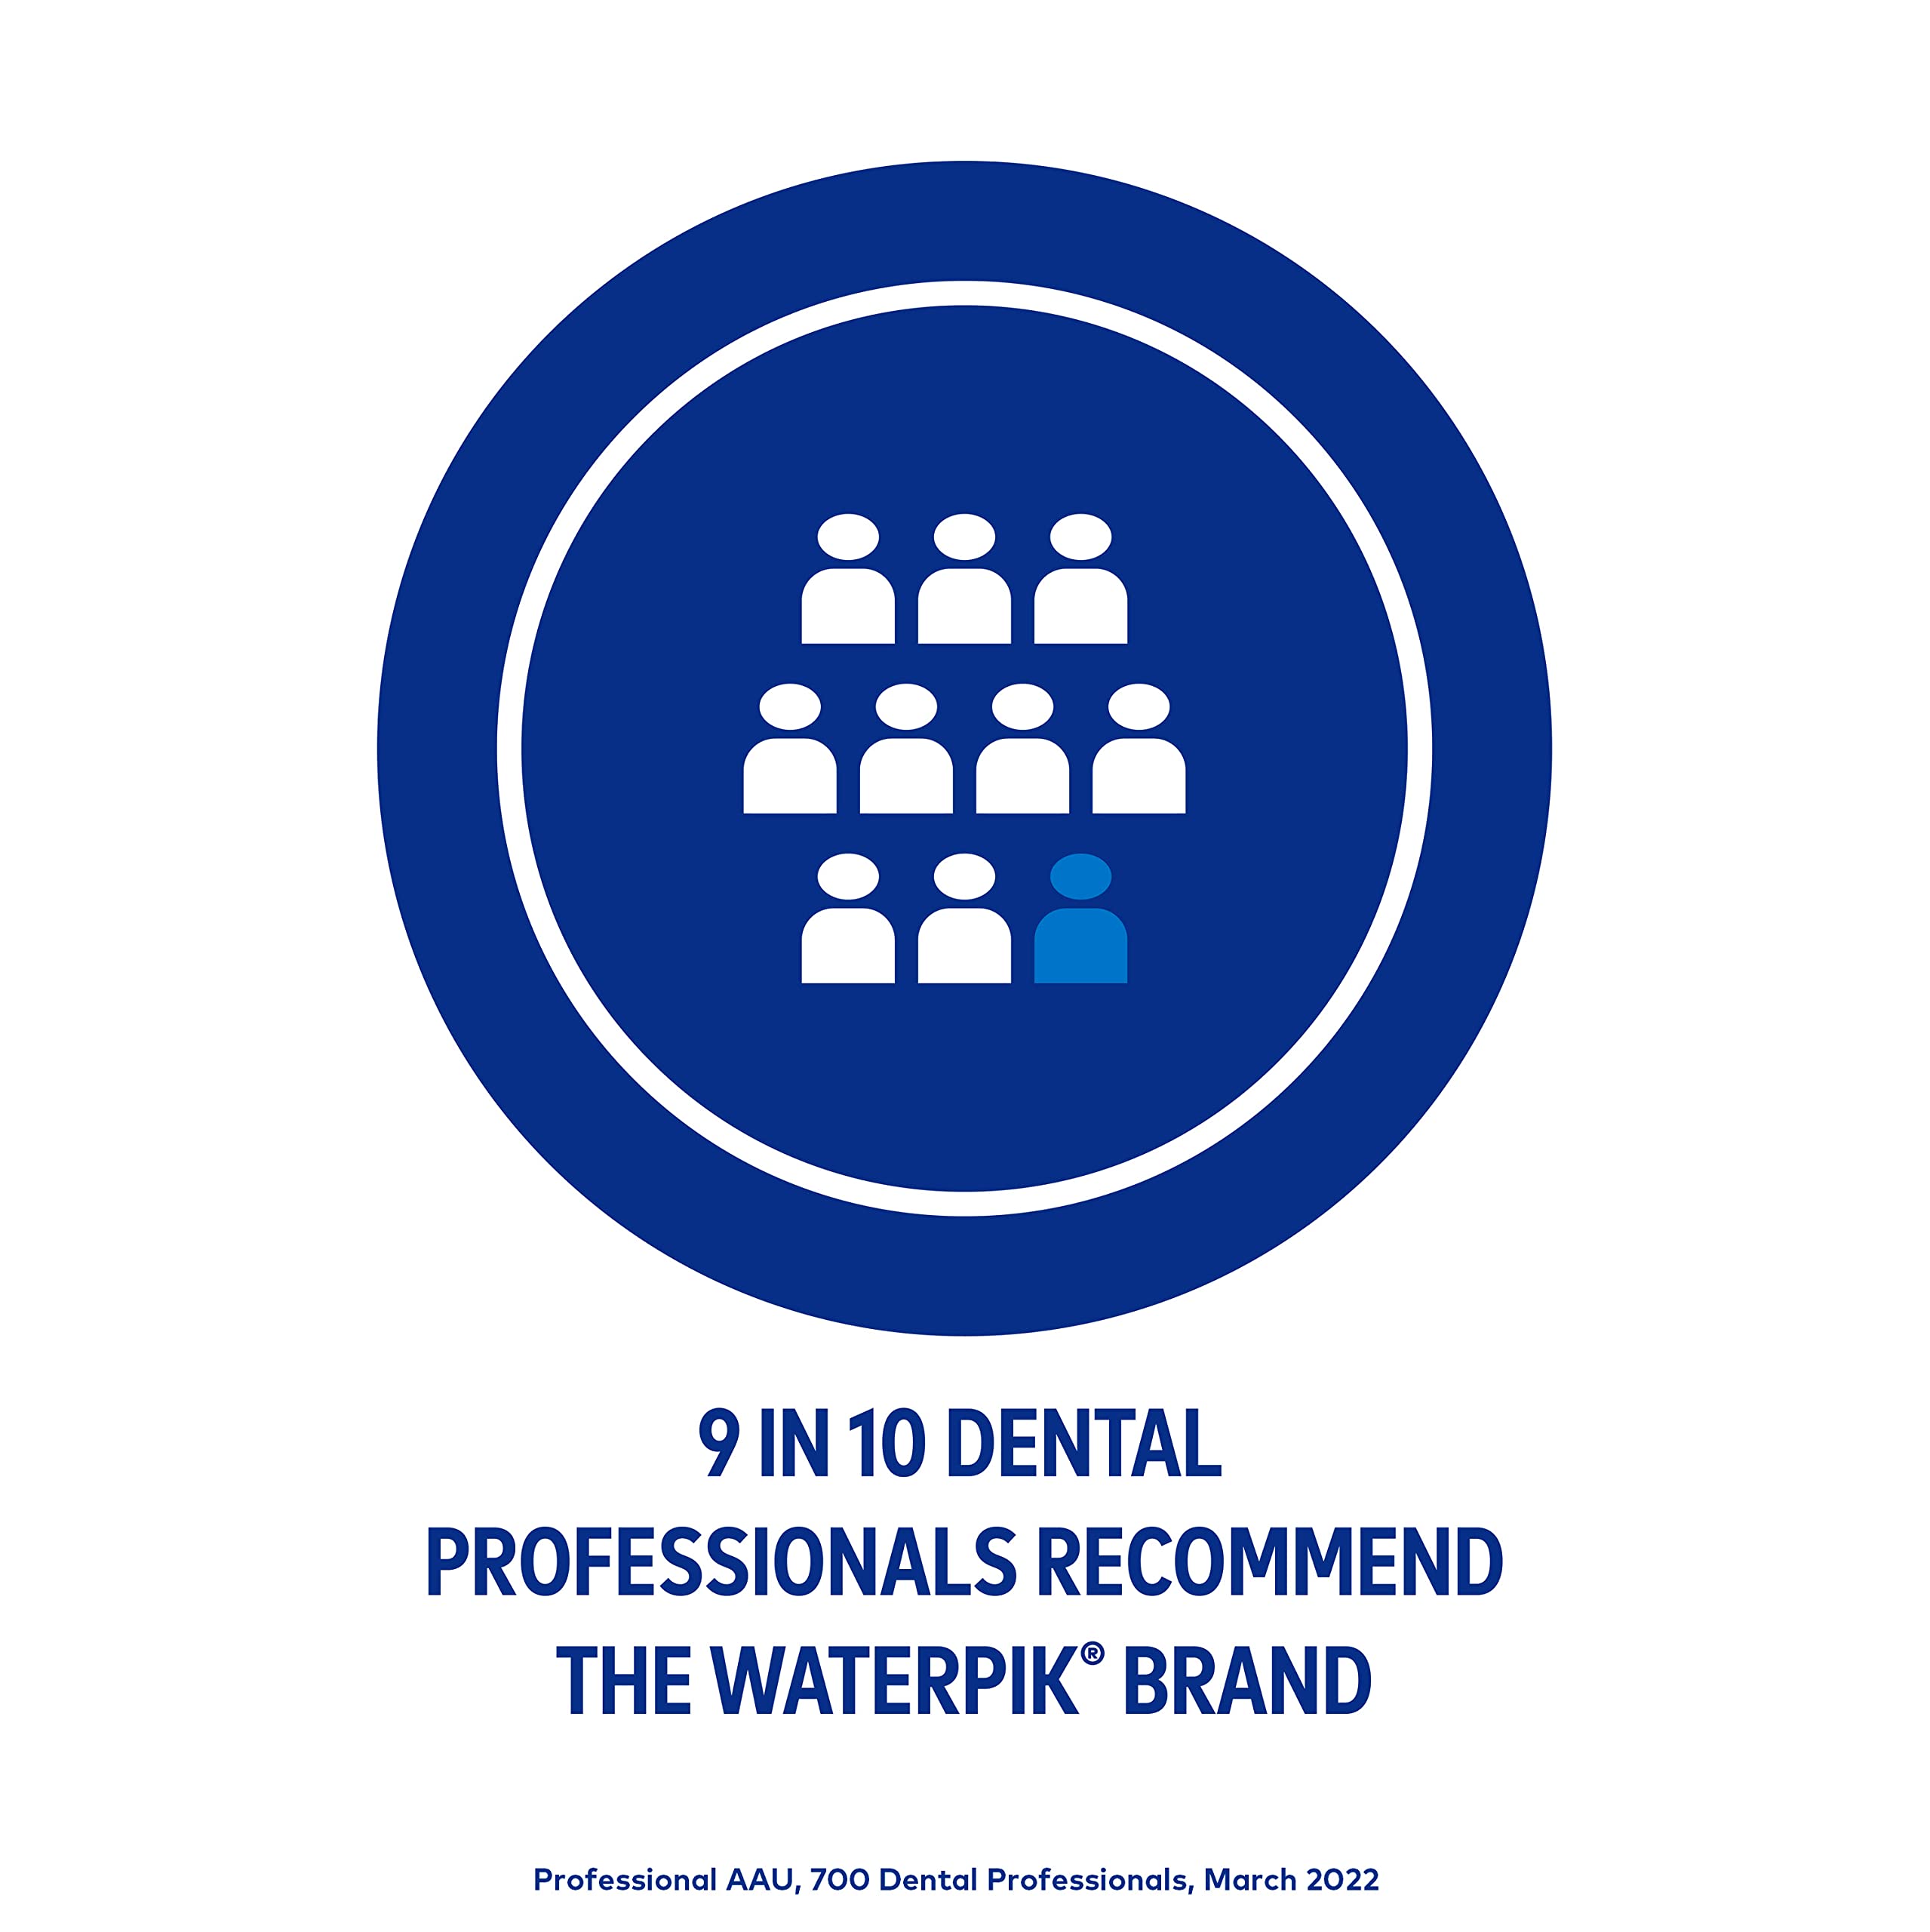 Waterpik Aquarius Water Flosser Professional For Teeth, Gums, Braces, Dental Care, Electric Power With 10 Settings, 7 Tips For Multiple Users And Needs, ADA Accepted, Blue WP-663